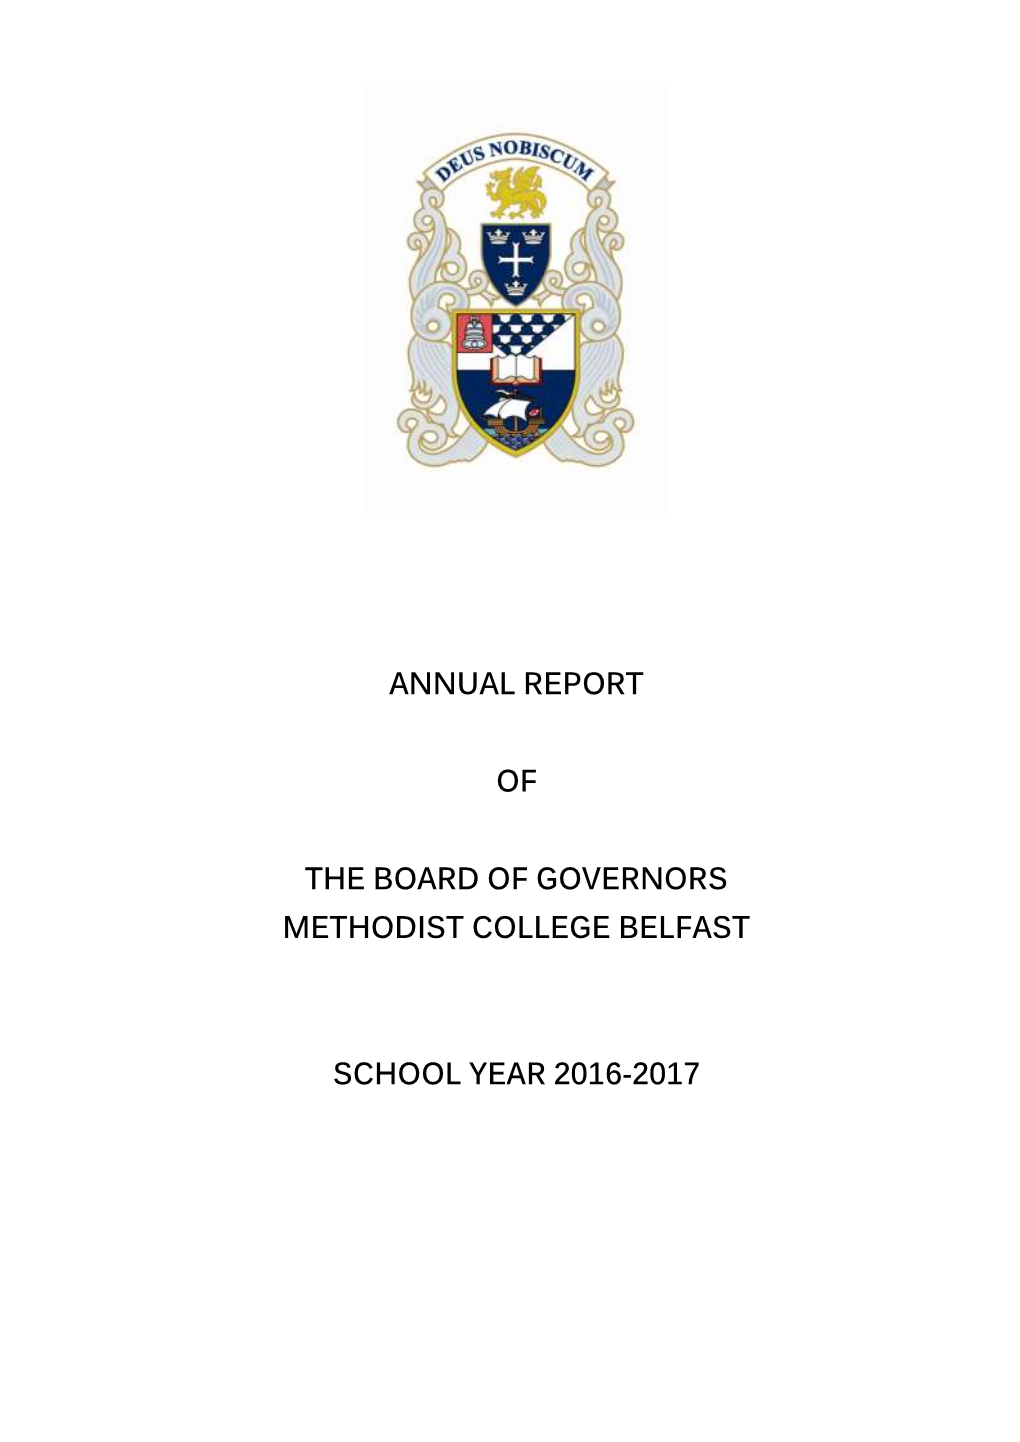 Annual Report of the Board of Governors Methodist College Belfast